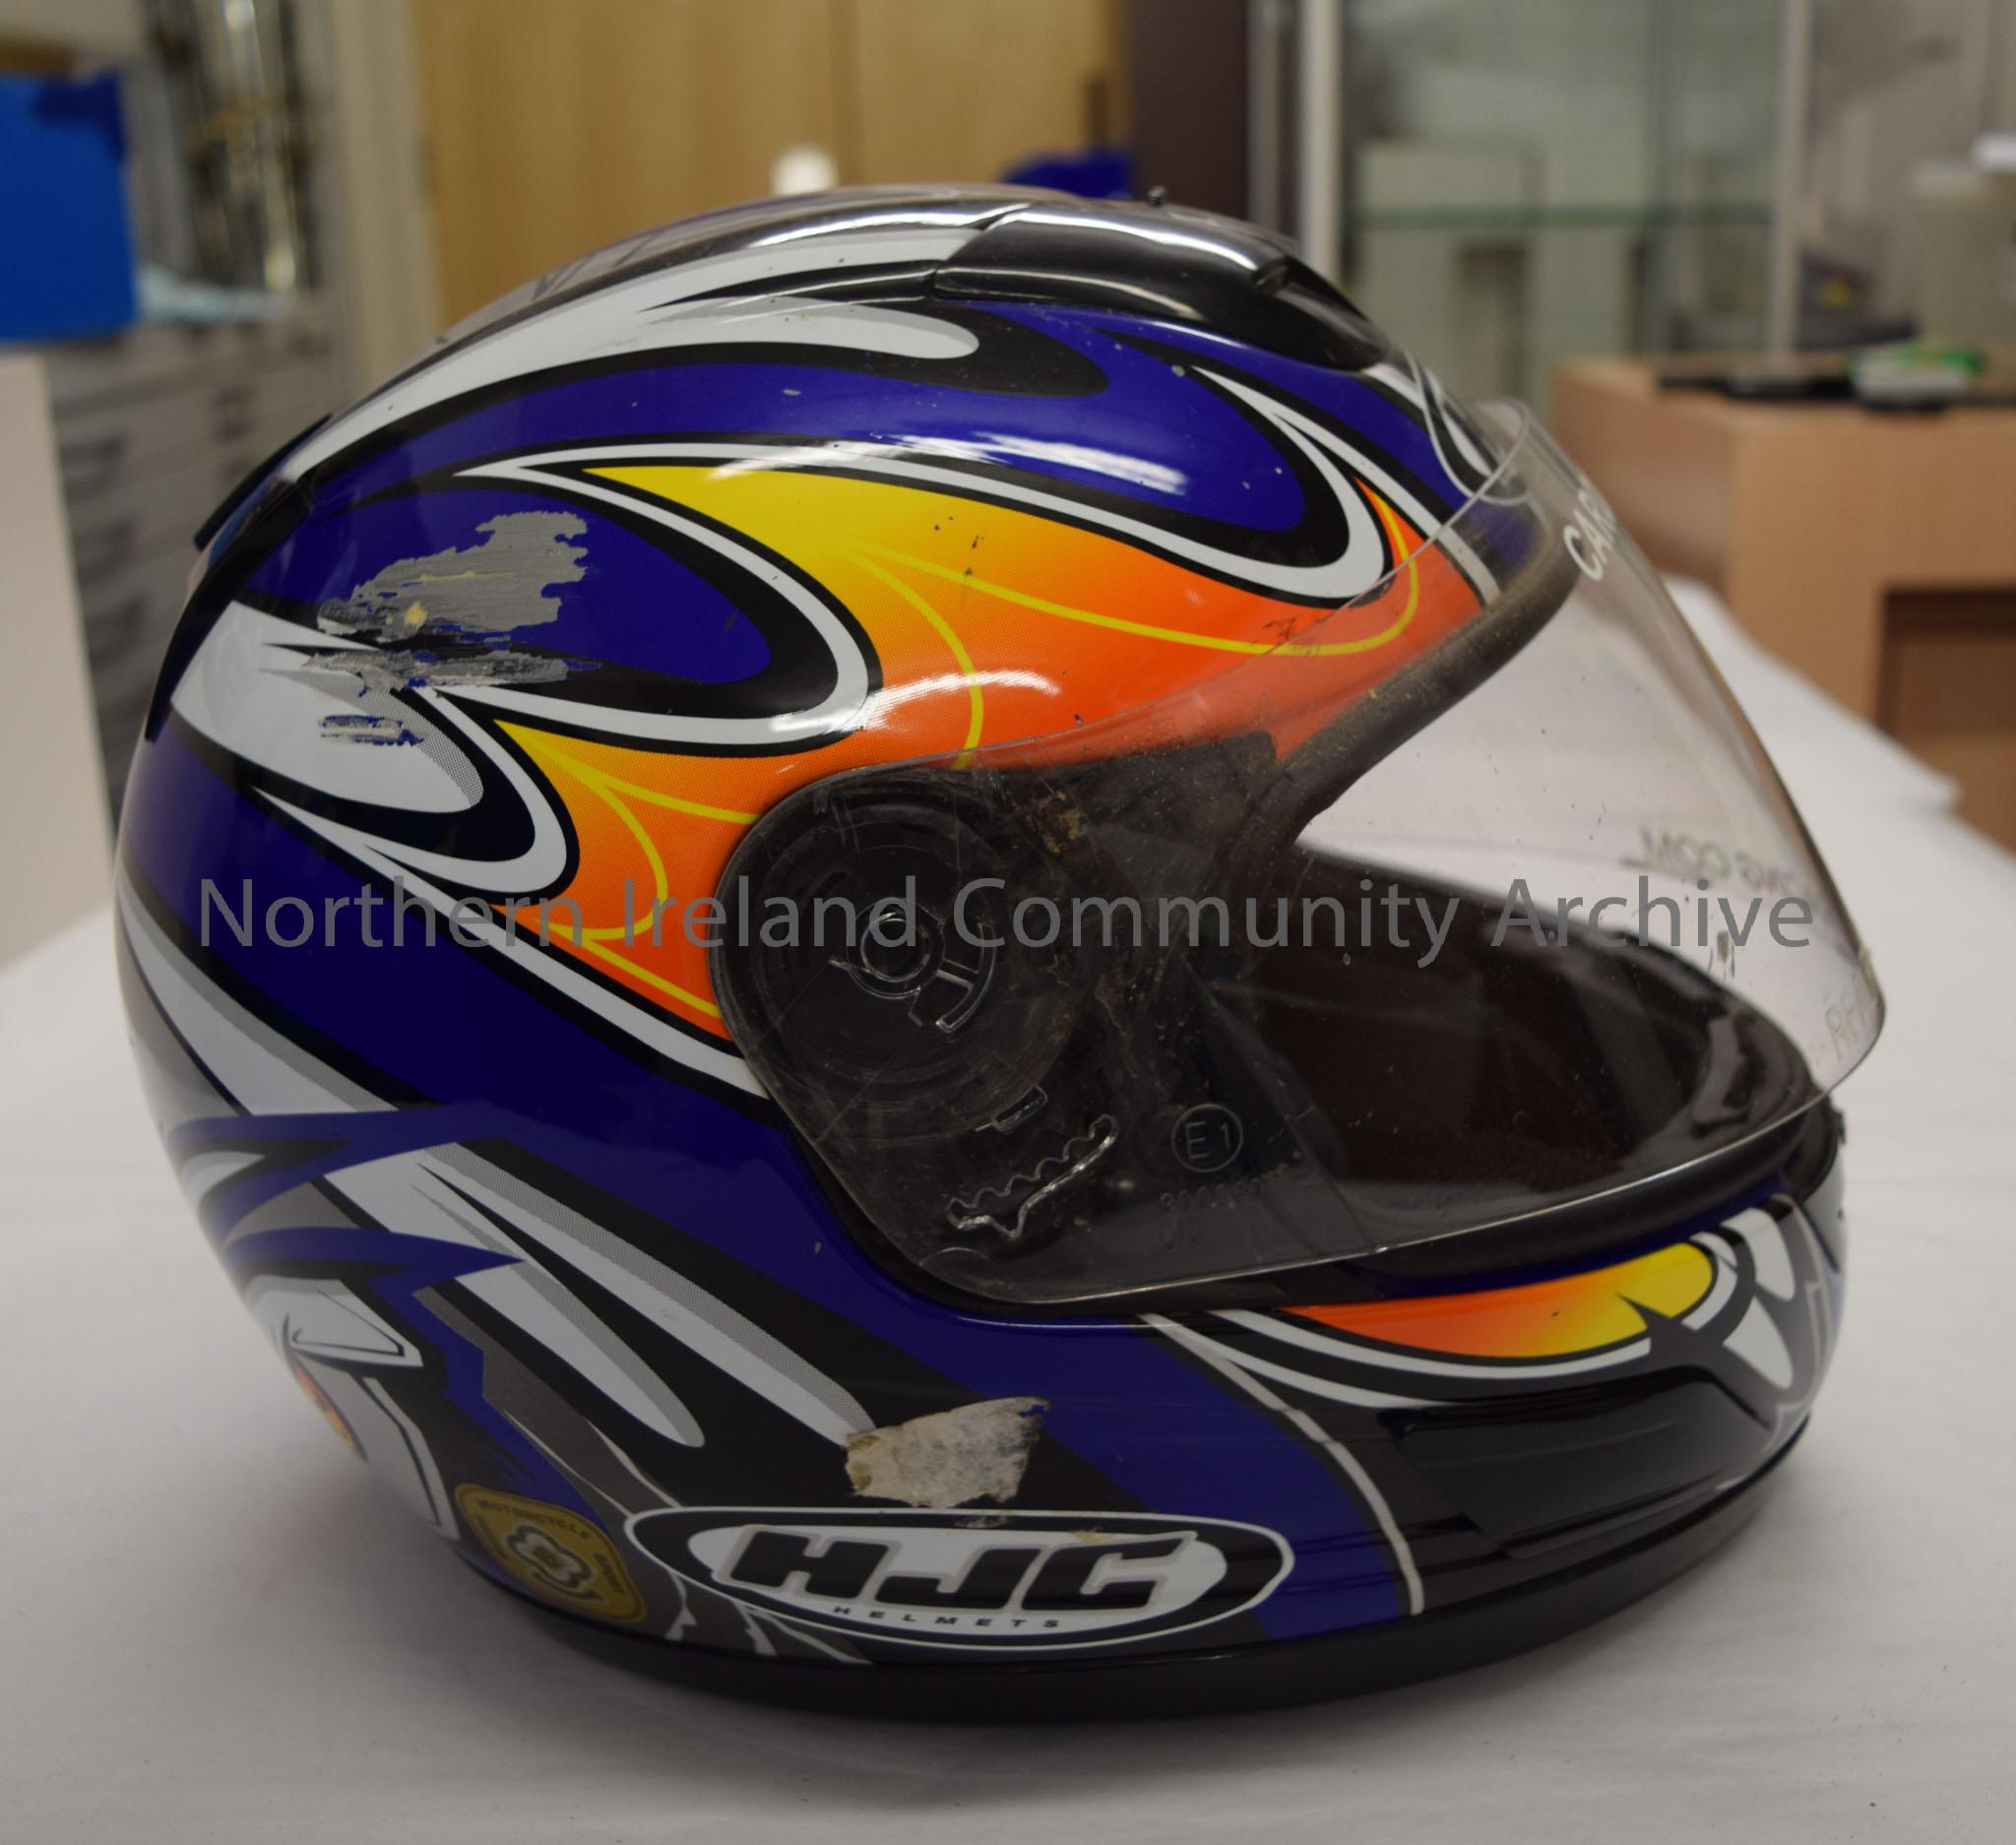 HJC motorcycle helmet belonging to Caroline Cells. Dark blue helmet with orange pattern on both sides and black, white and silver pattern across the t… – 2016.36 (5)